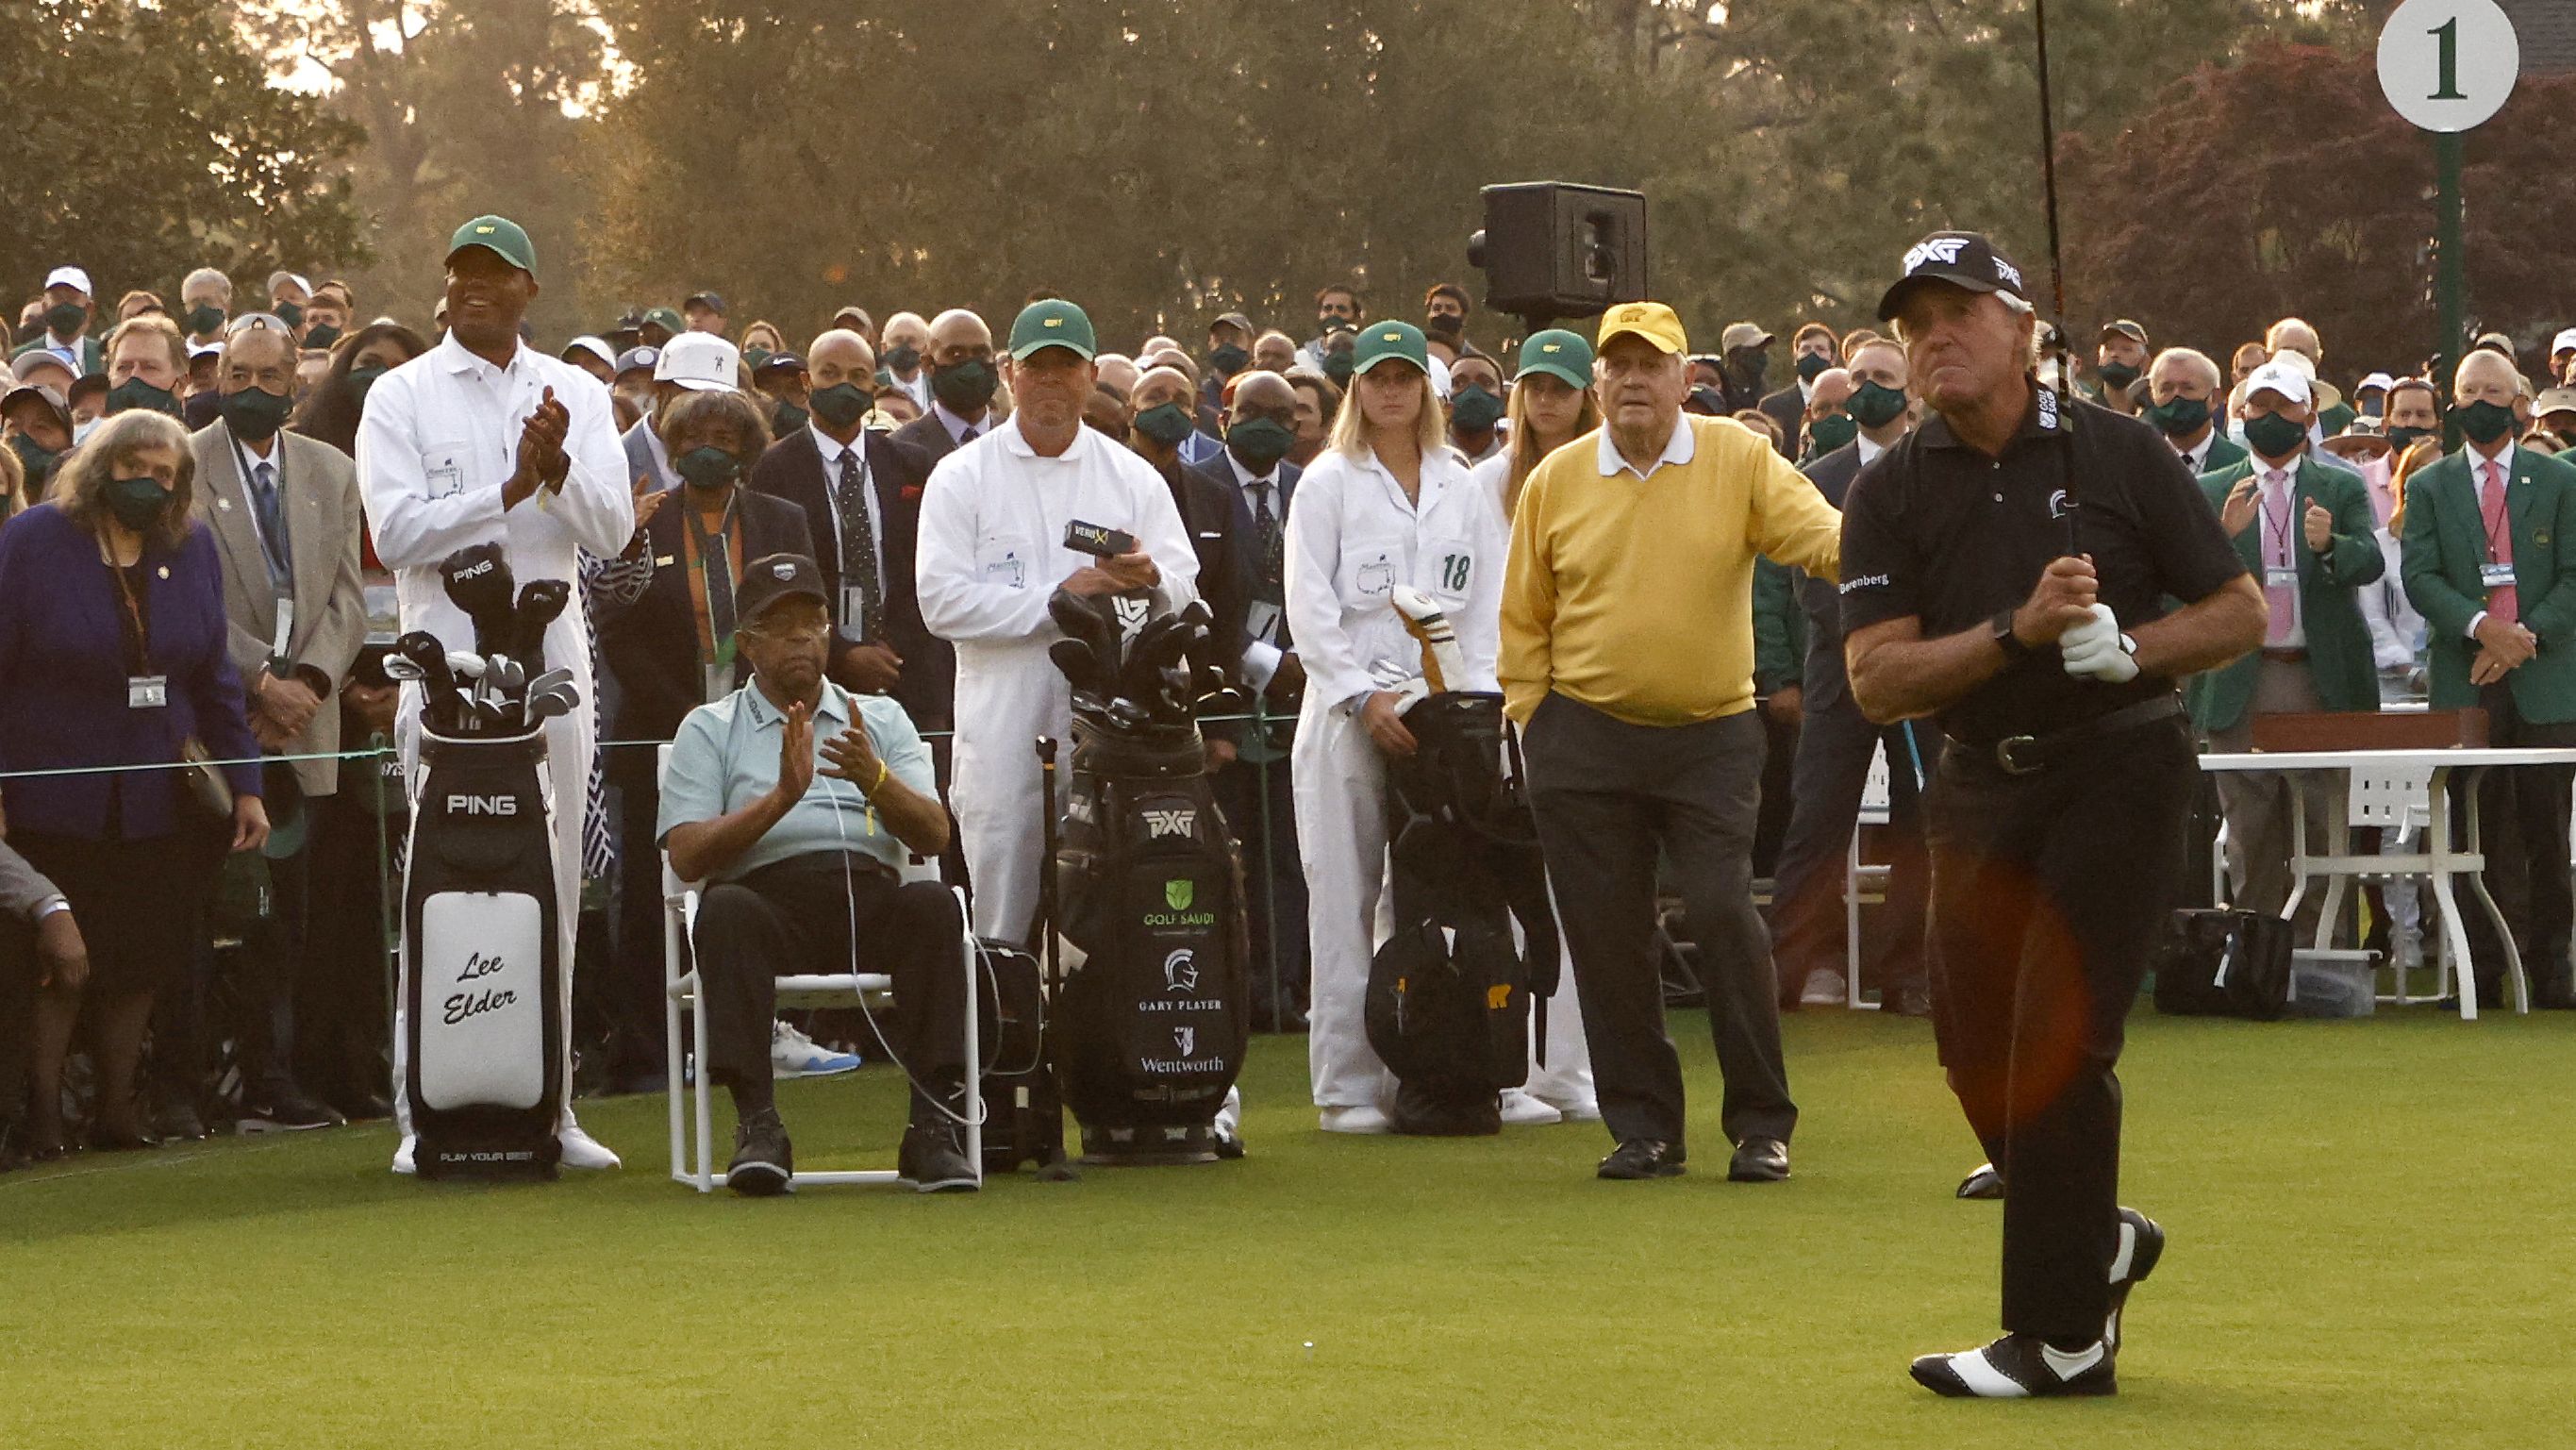 Gary Player plays his opening tee shot during the opening ceremony of the 2021 Masters.